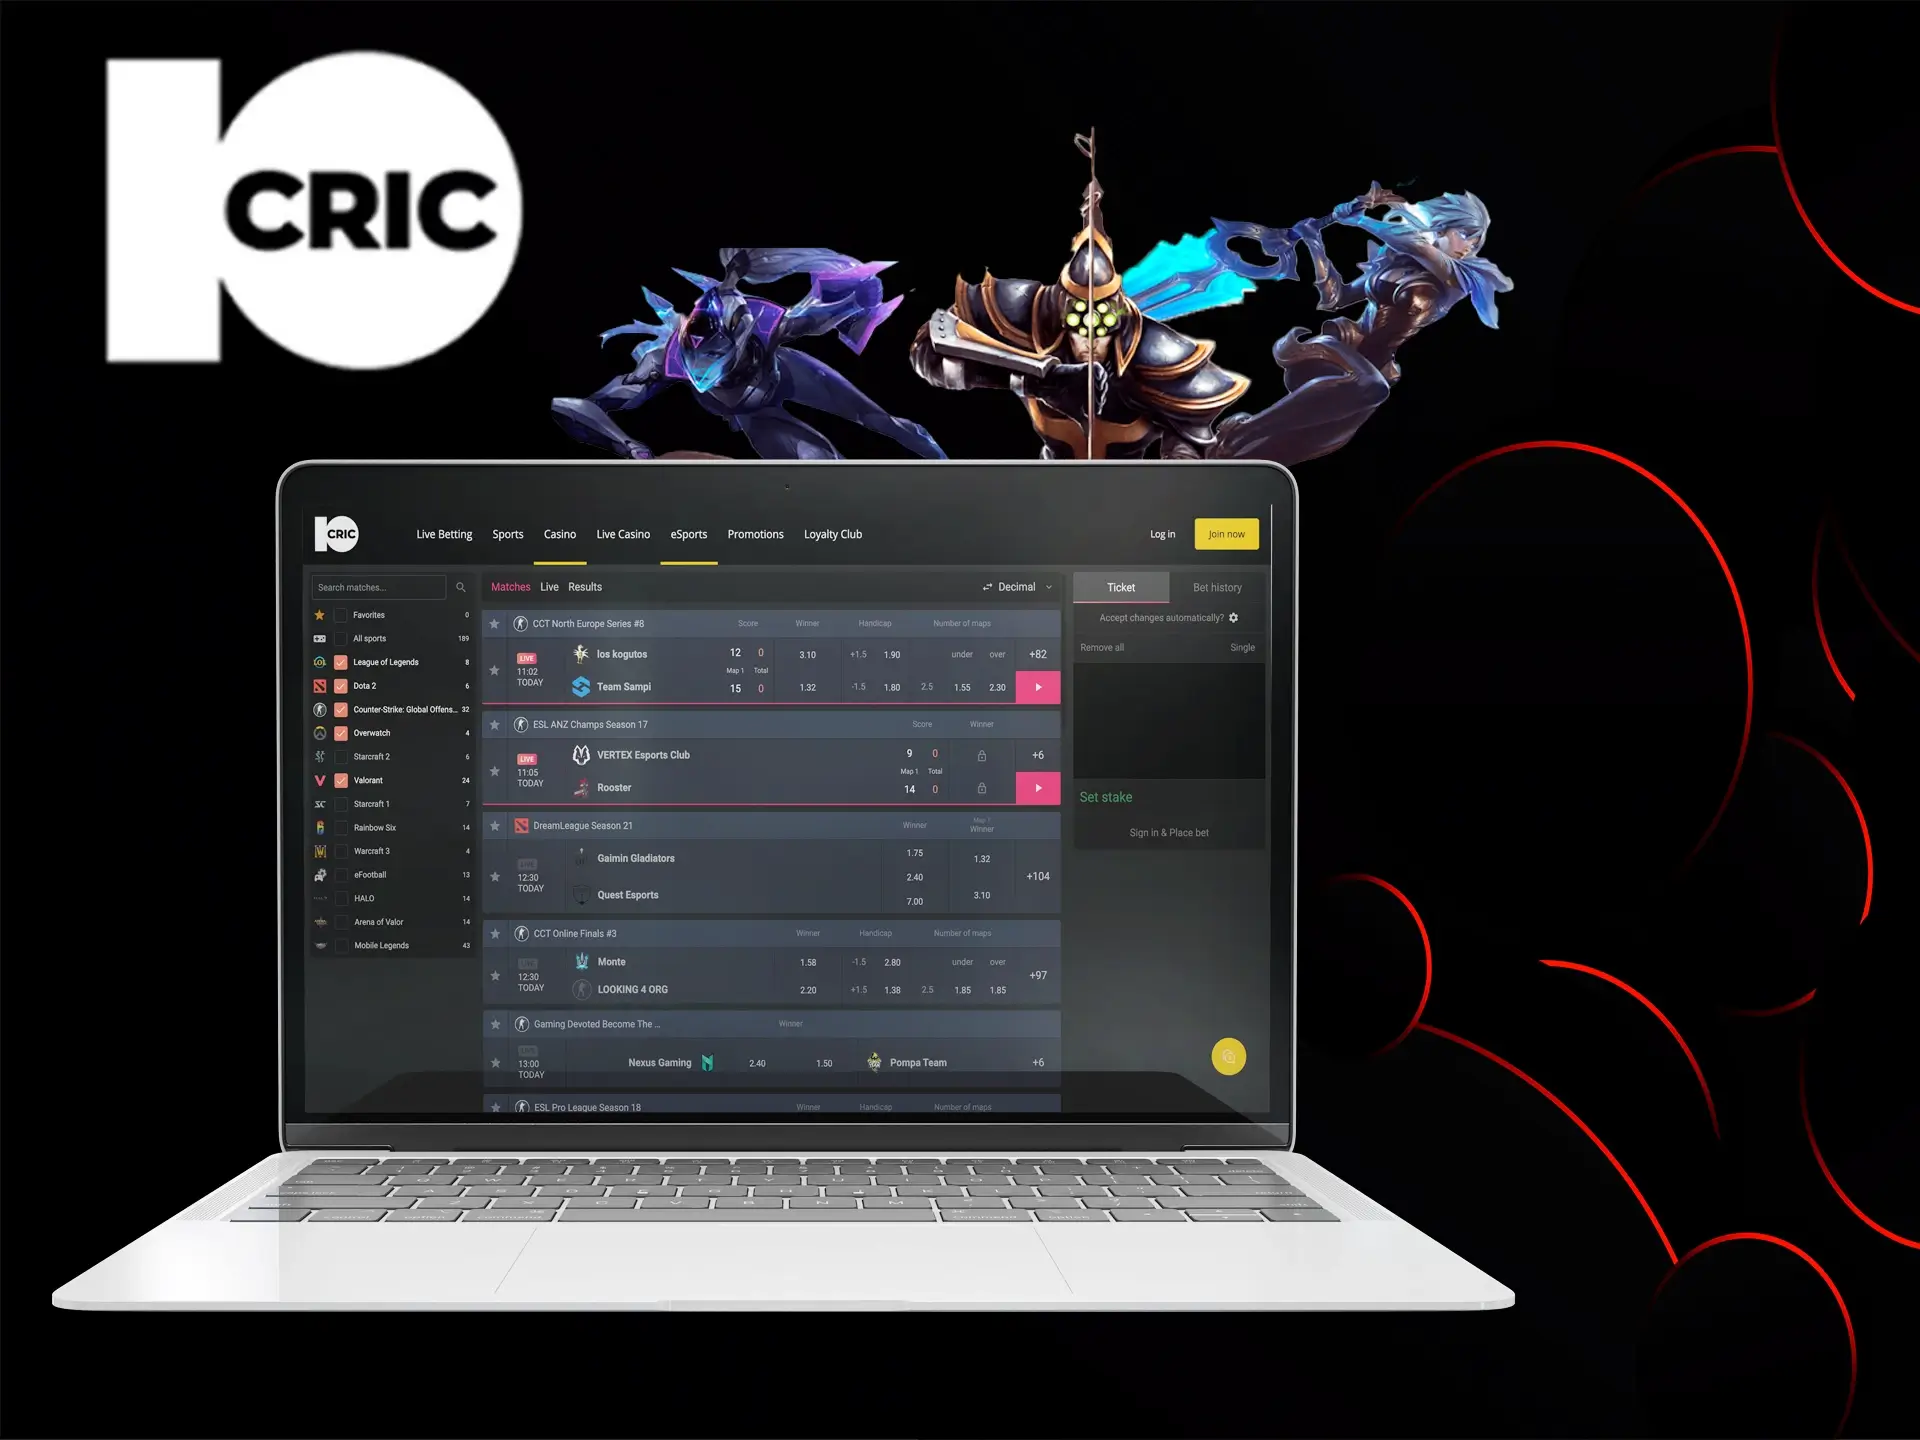 10Cric has earned the trust of millions of cybersports fans.